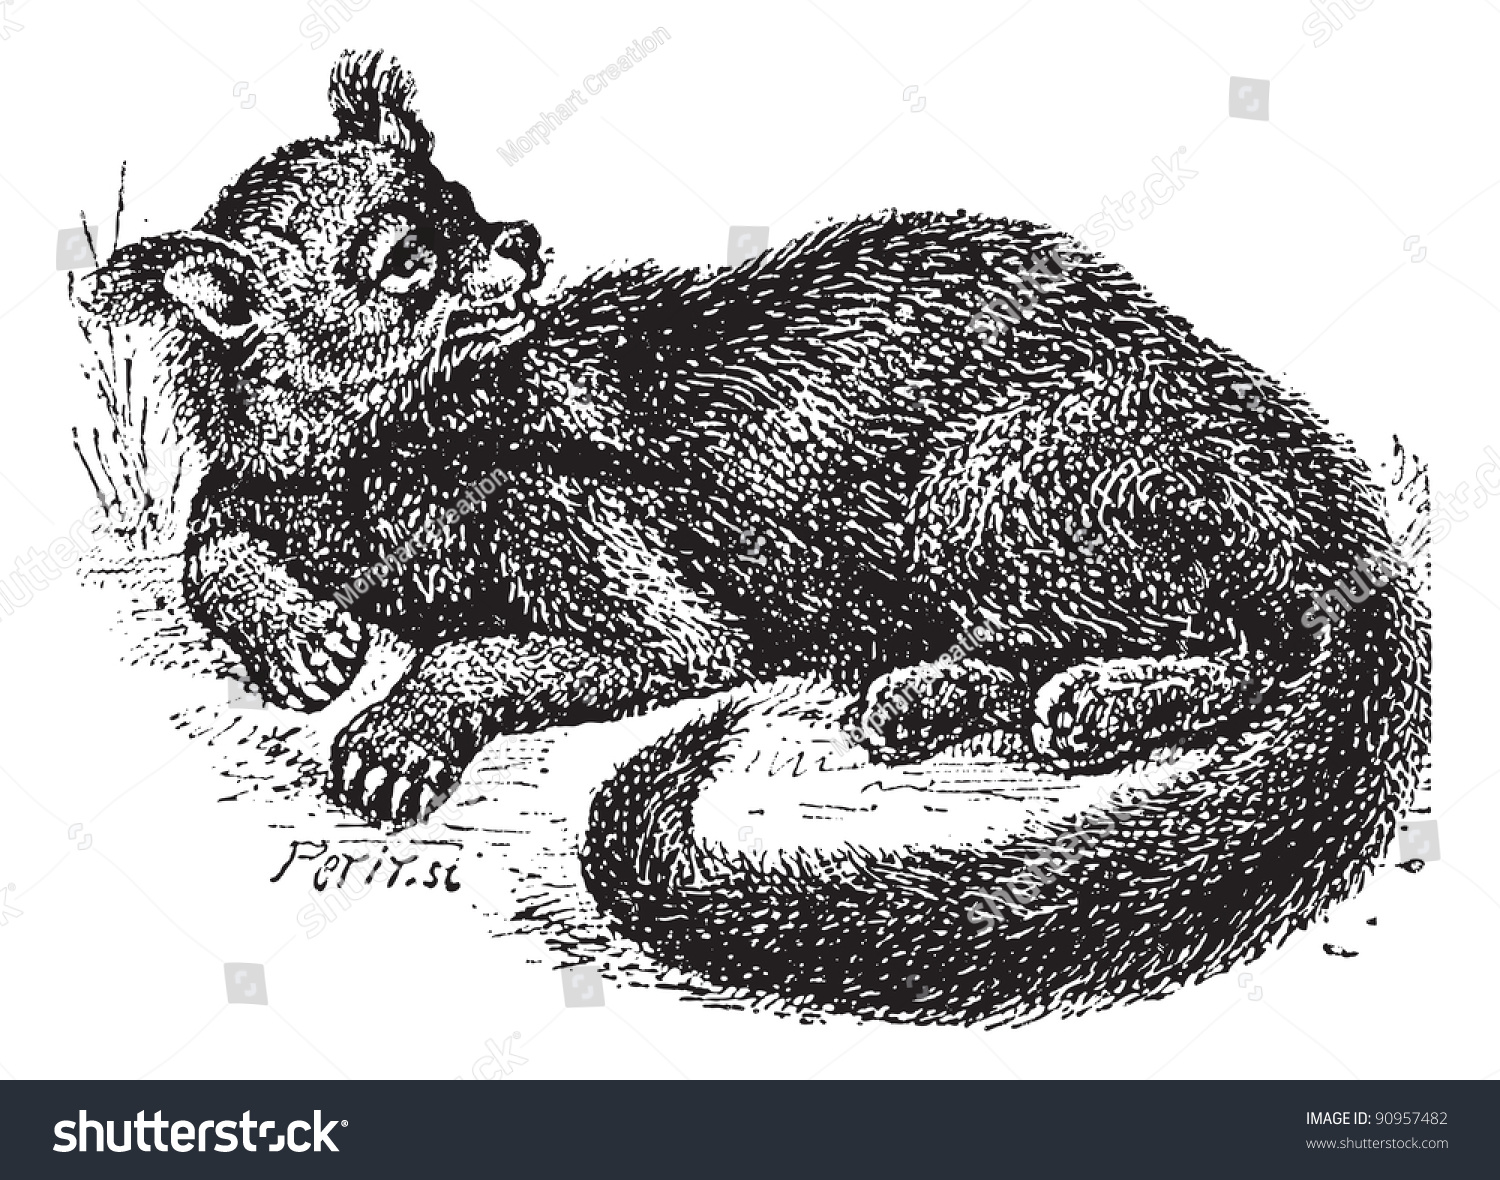 SVG of Old engraved illustration of Binturong or Arctictis binturong or Asian Bearcat or Palawan Bearcat or Bearcat in the meadow.Dictionary of words and things - Larive and Fleury, 1895 svg